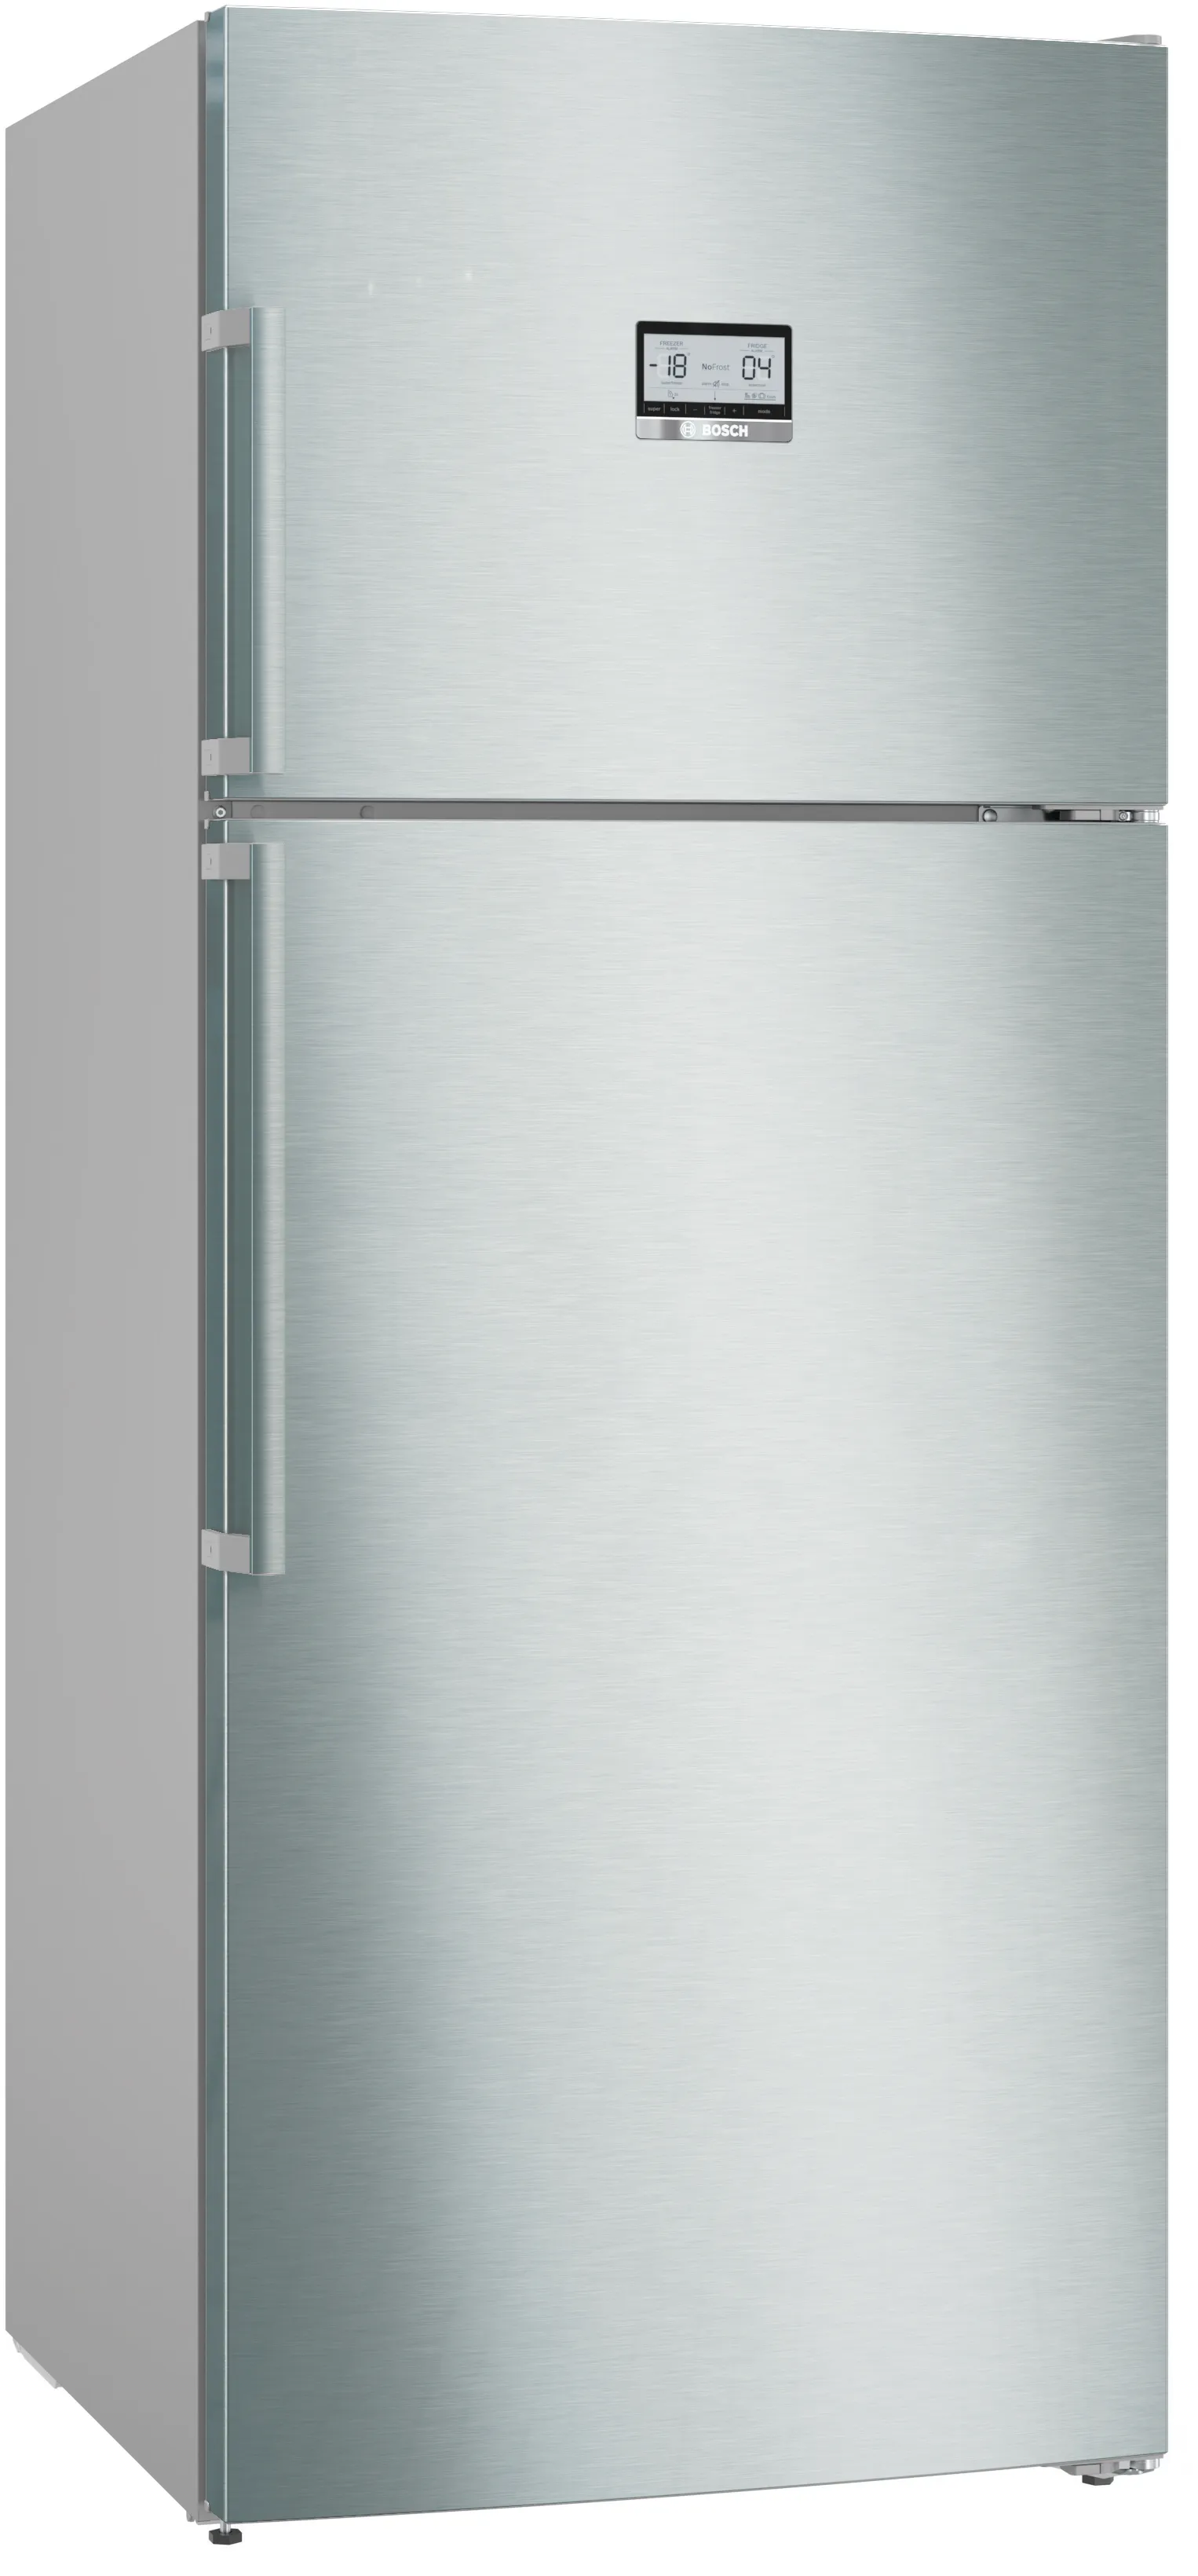 Series 6 free-standing fridge-freezer with freezer at top 186 x 75 cm Stainless steel (with anti-fingerprint) 